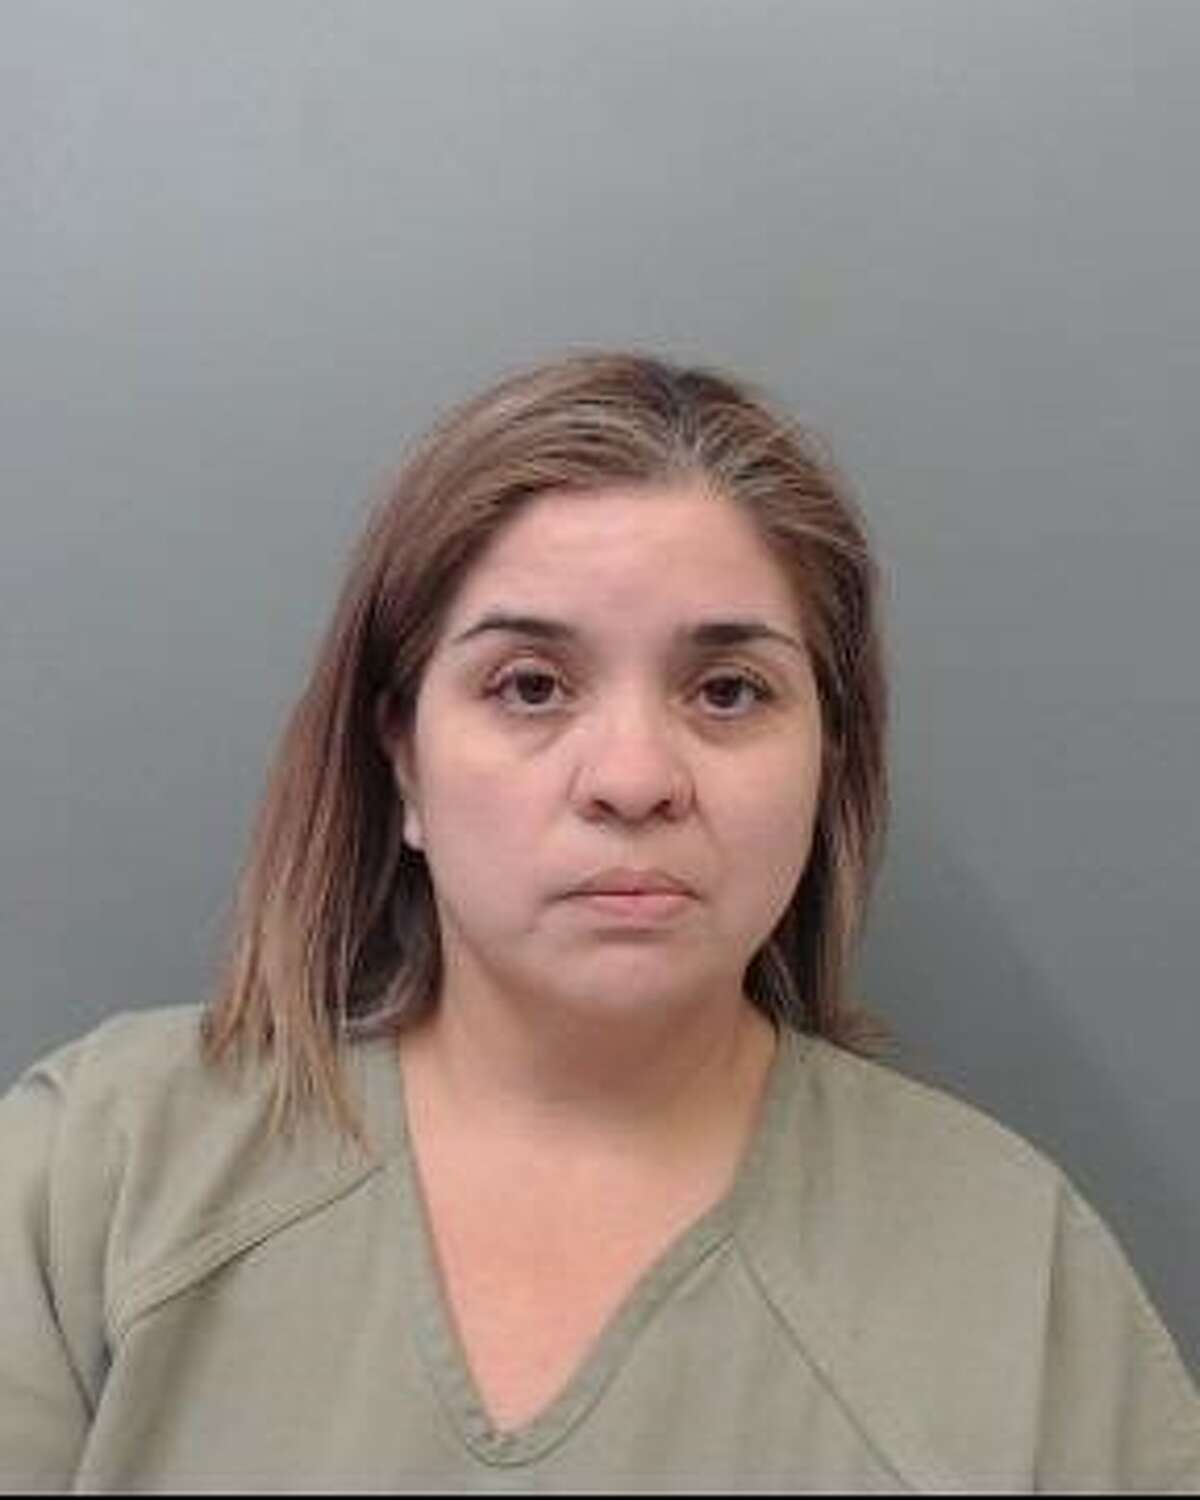 Yuriria Verastegui, 40, was charged with via criminal complaint with possess with intent to distribute, conspire to possess with intent to distribute, import and conspire to import cocaine.